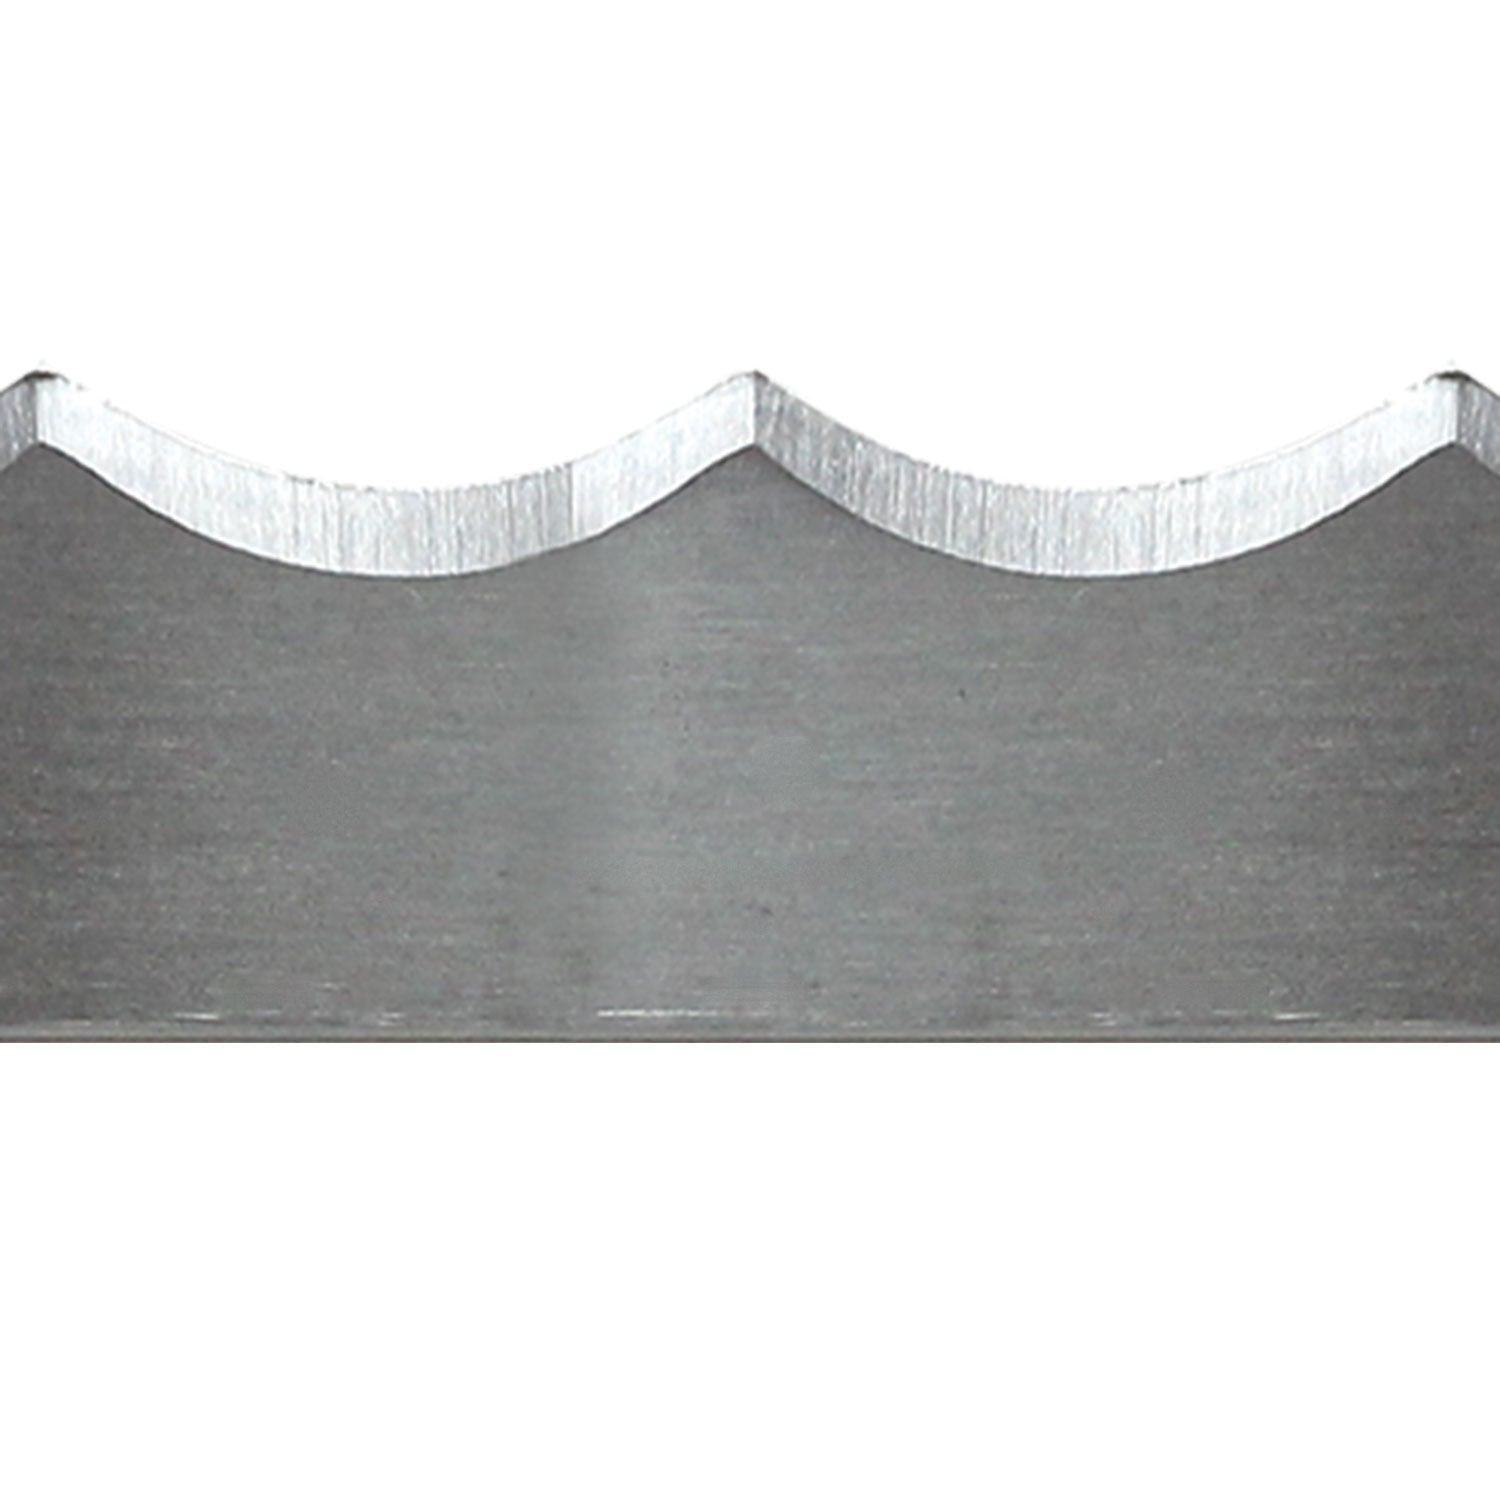 Meat Band Saw Blade - Scallop Edge - 142 in. x 5/8 in. x .022 in. - Pack of 4